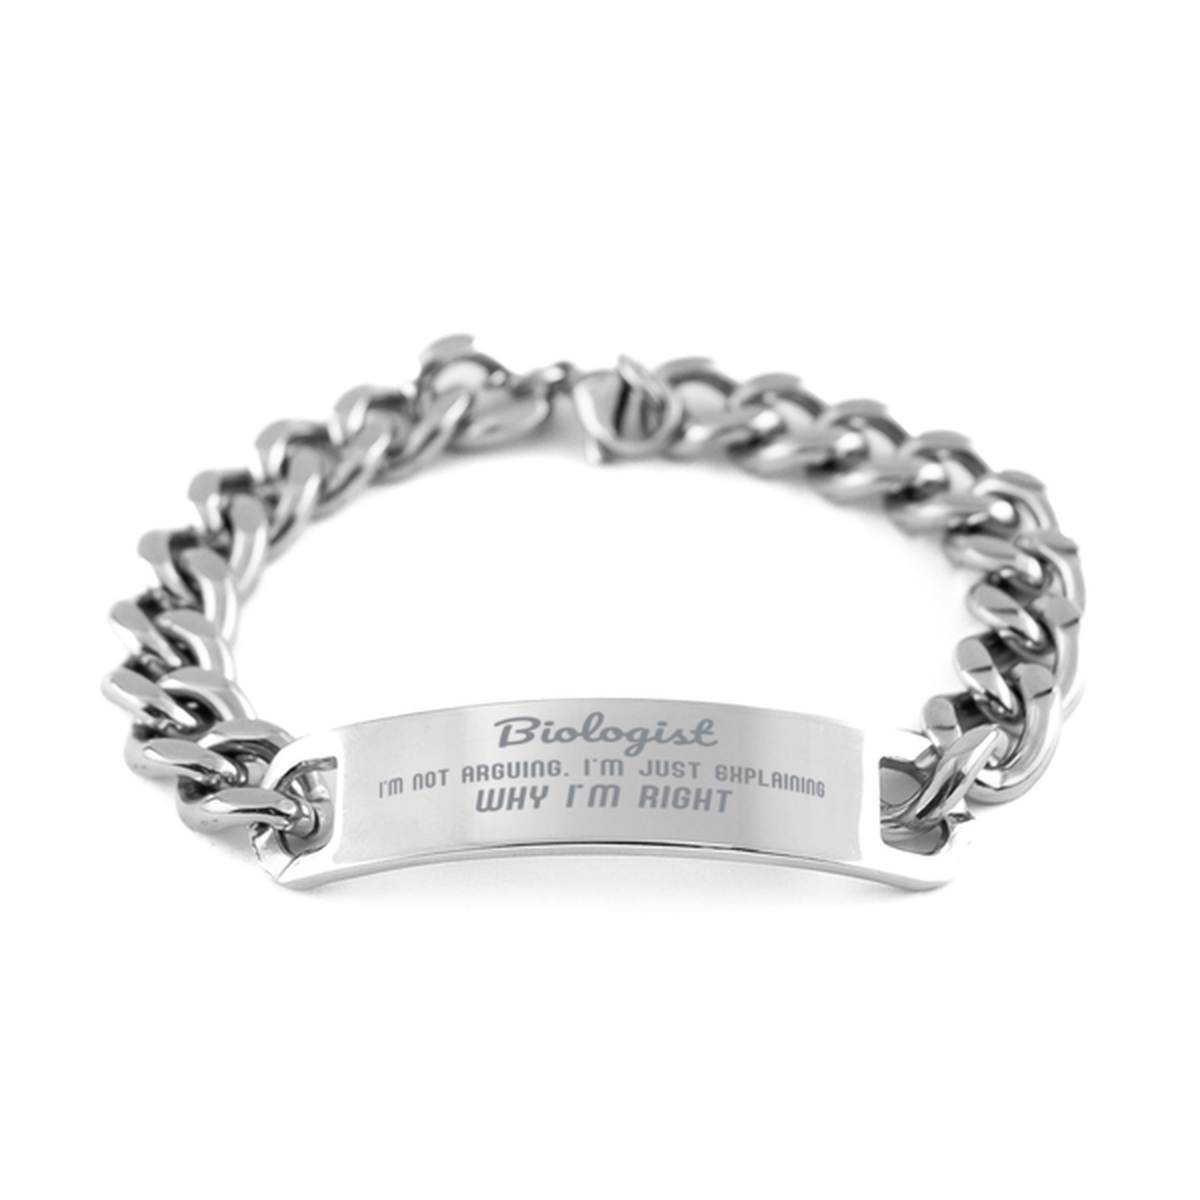 Biologist I'm not Arguing. I'm Just Explaining Why I'm RIGHT Cuban Chain Stainless Steel Bracelet, Graduation Birthday Christmas Biologist Gifts For Biologist Funny Saying Quote Present for Men Women Coworker